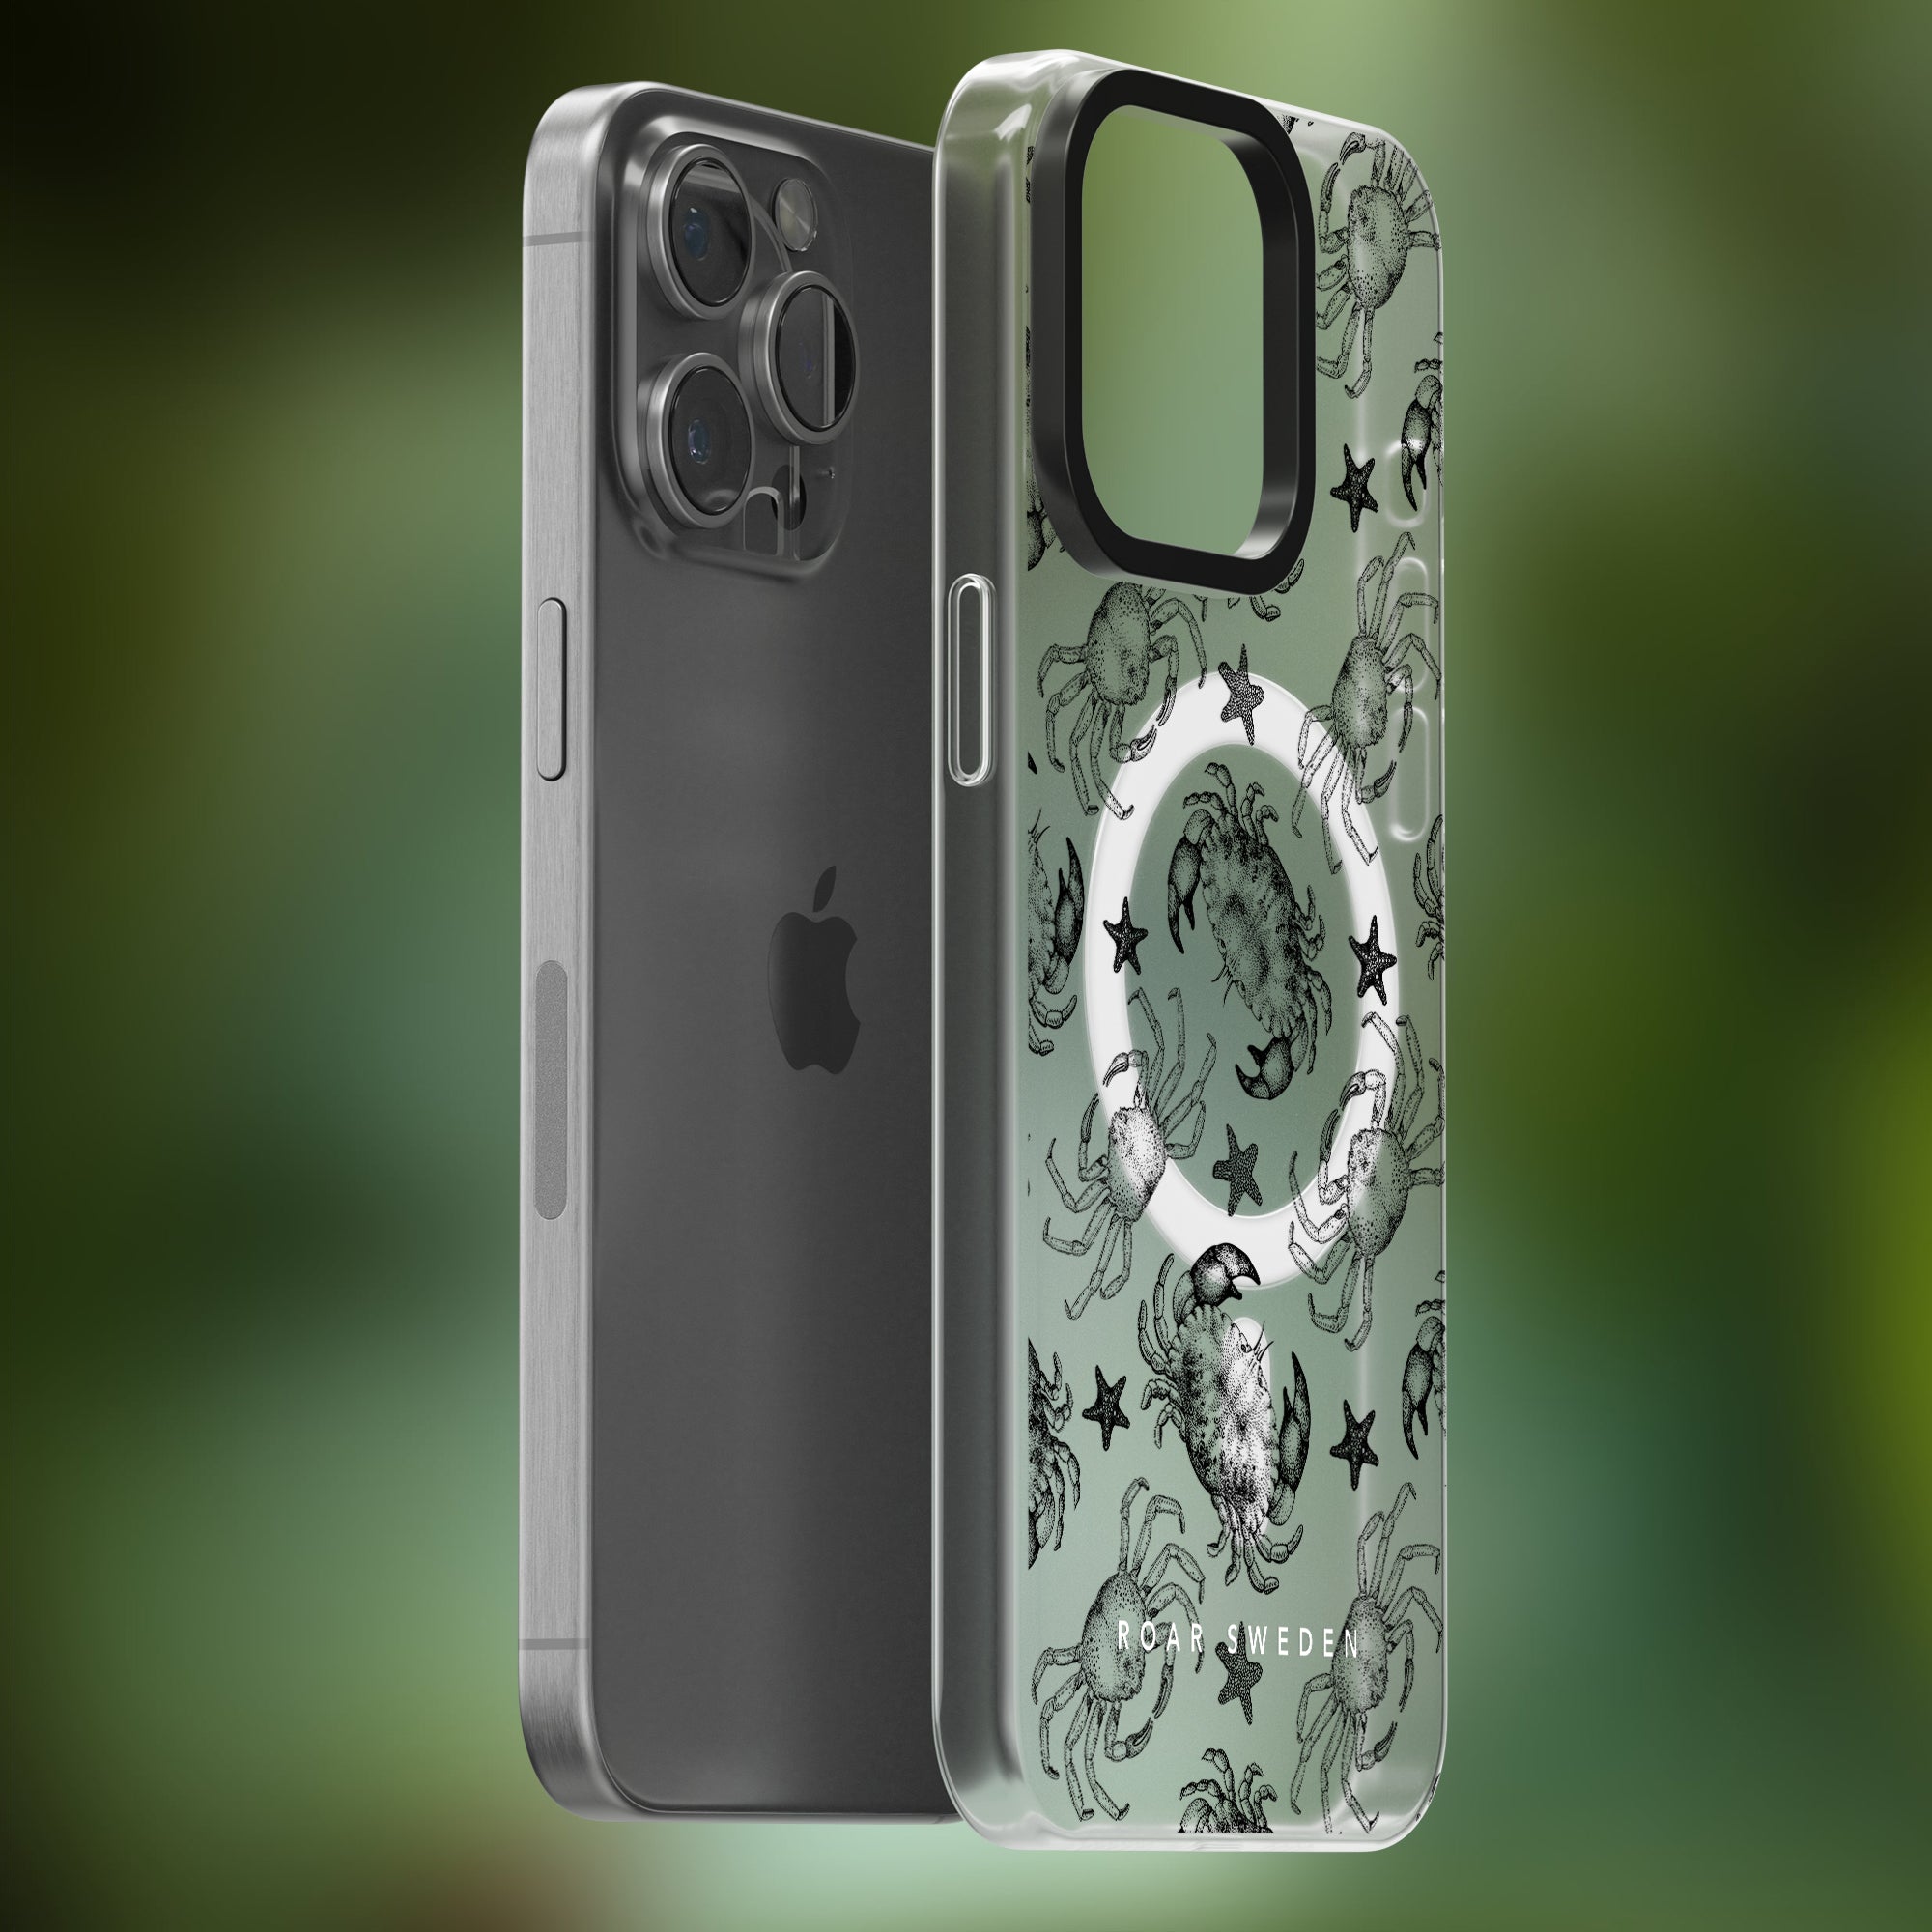 A silver iPhone with a detachable, transparent phone case featuring an ocean-themed accessory design of crabs, stars, and the phrase "Black Crab - MagSafe," shown against a blurred green background.